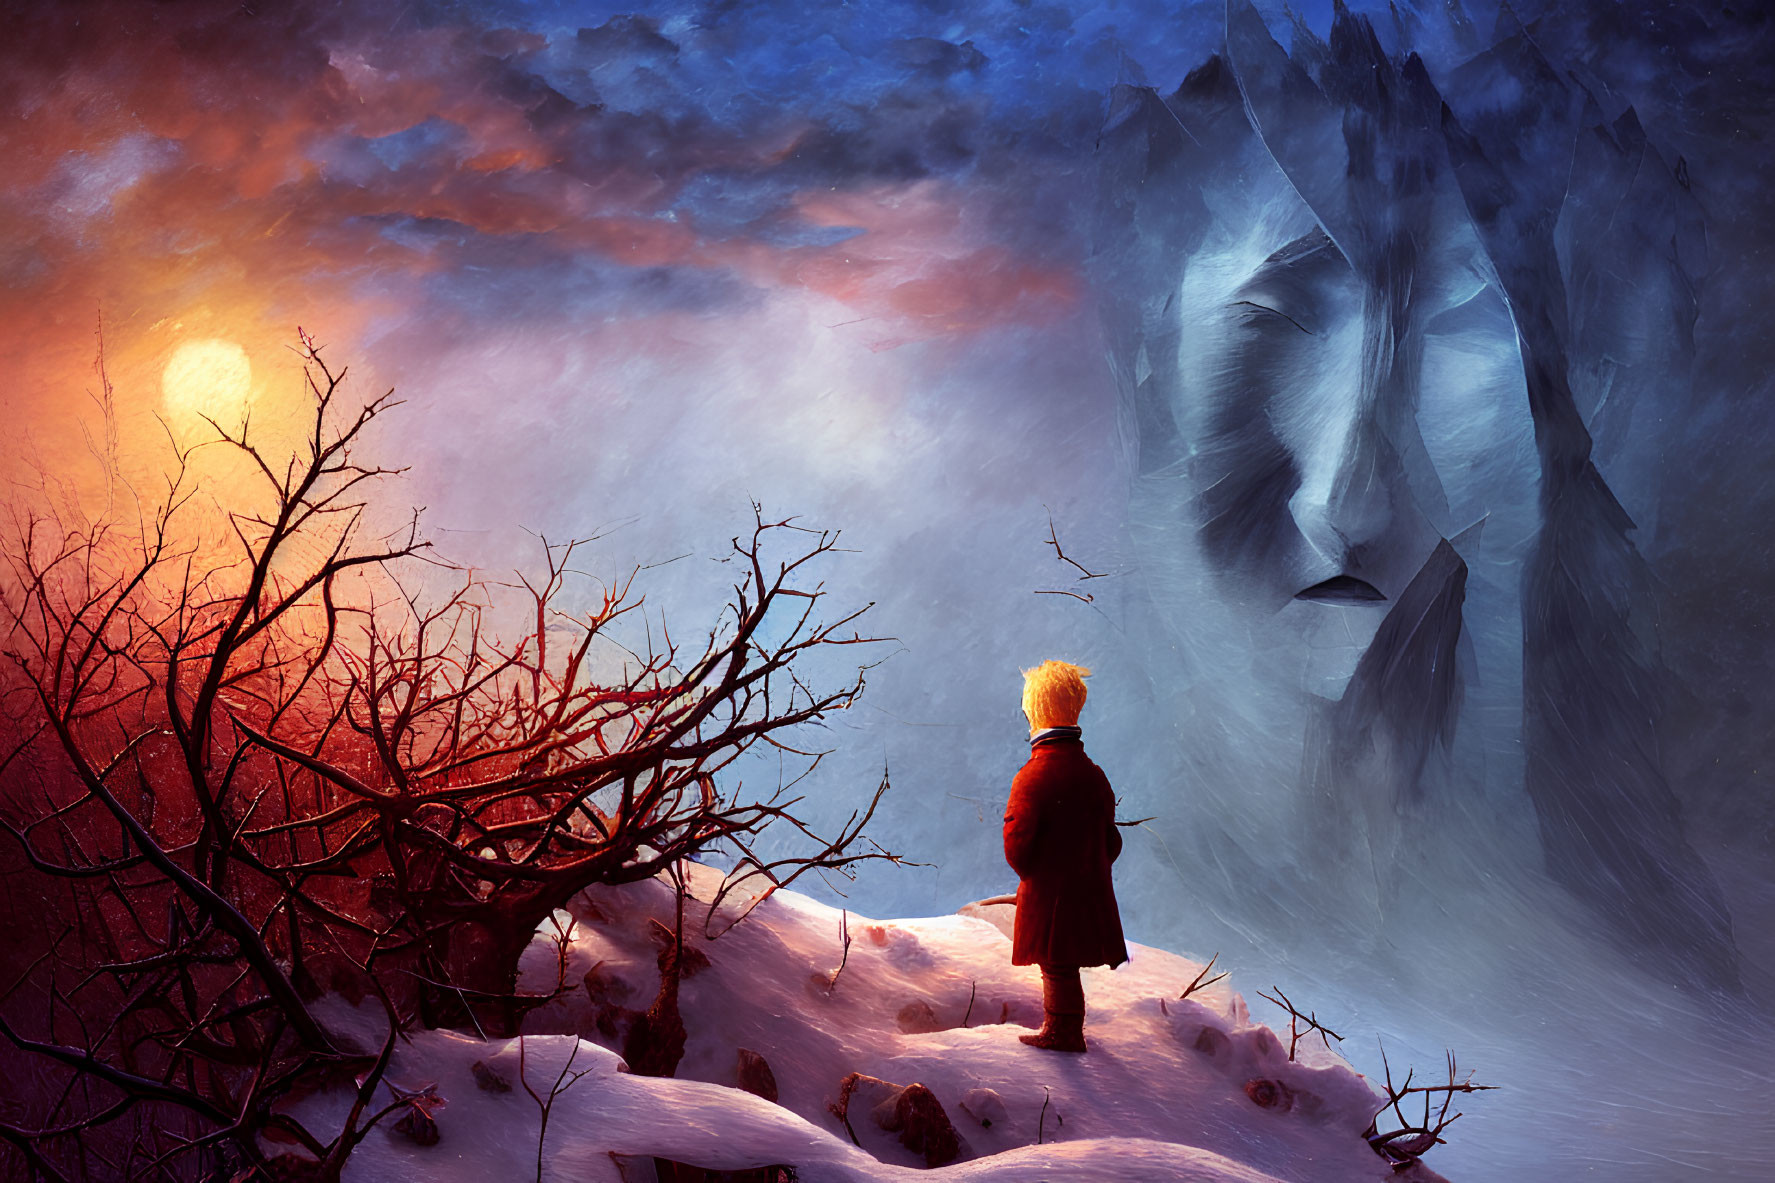 Child in red coat on snowy hill near face-shaped mountain under dramatic sunset.